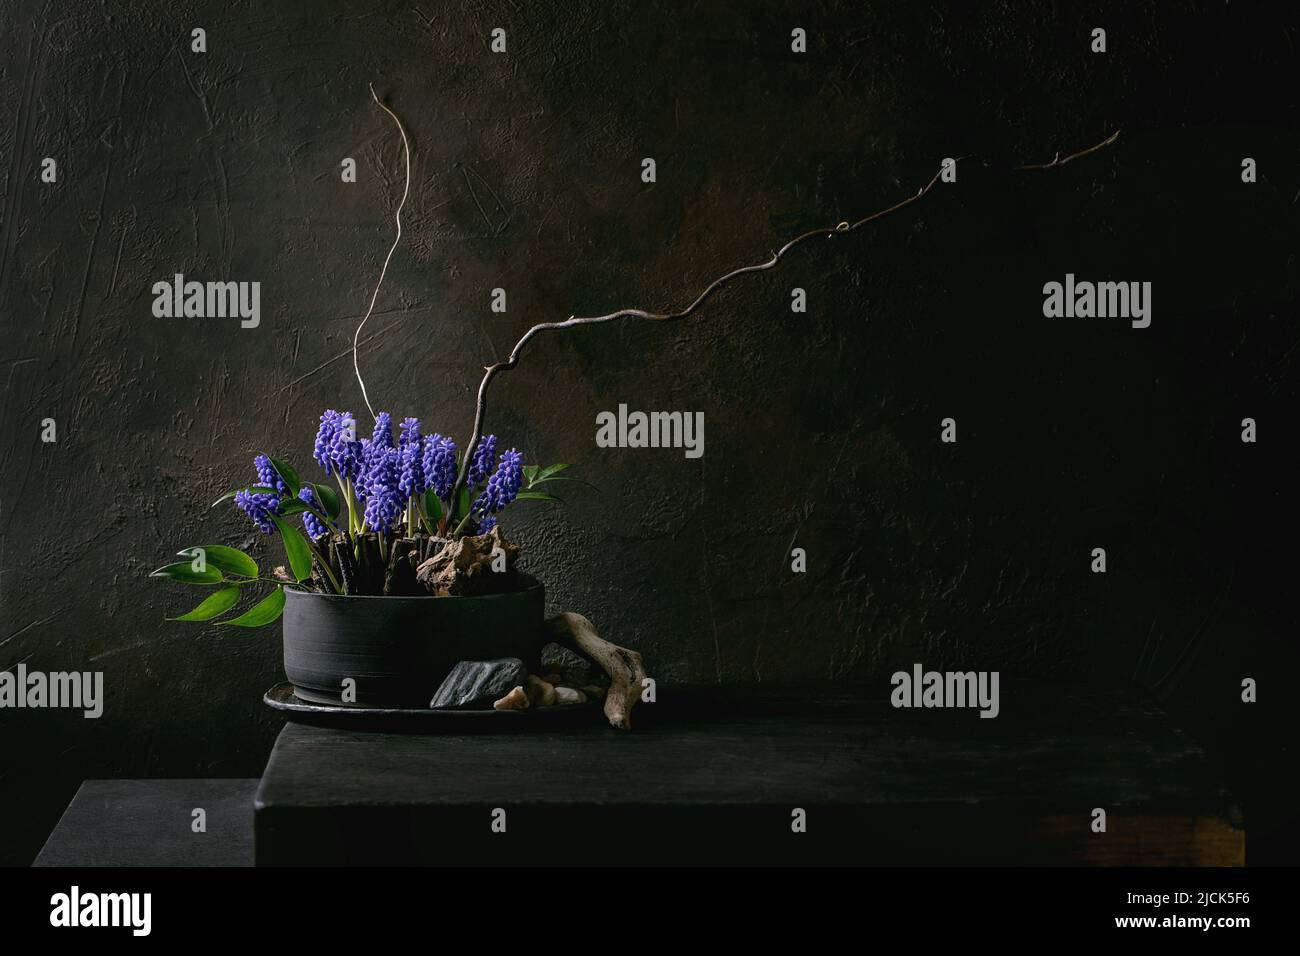 Spring ikebana. Floral composition with spring blooming blue muscari flowers and stones in black ceramic bowl, standing on black wooden table. Japanes Stock Photo